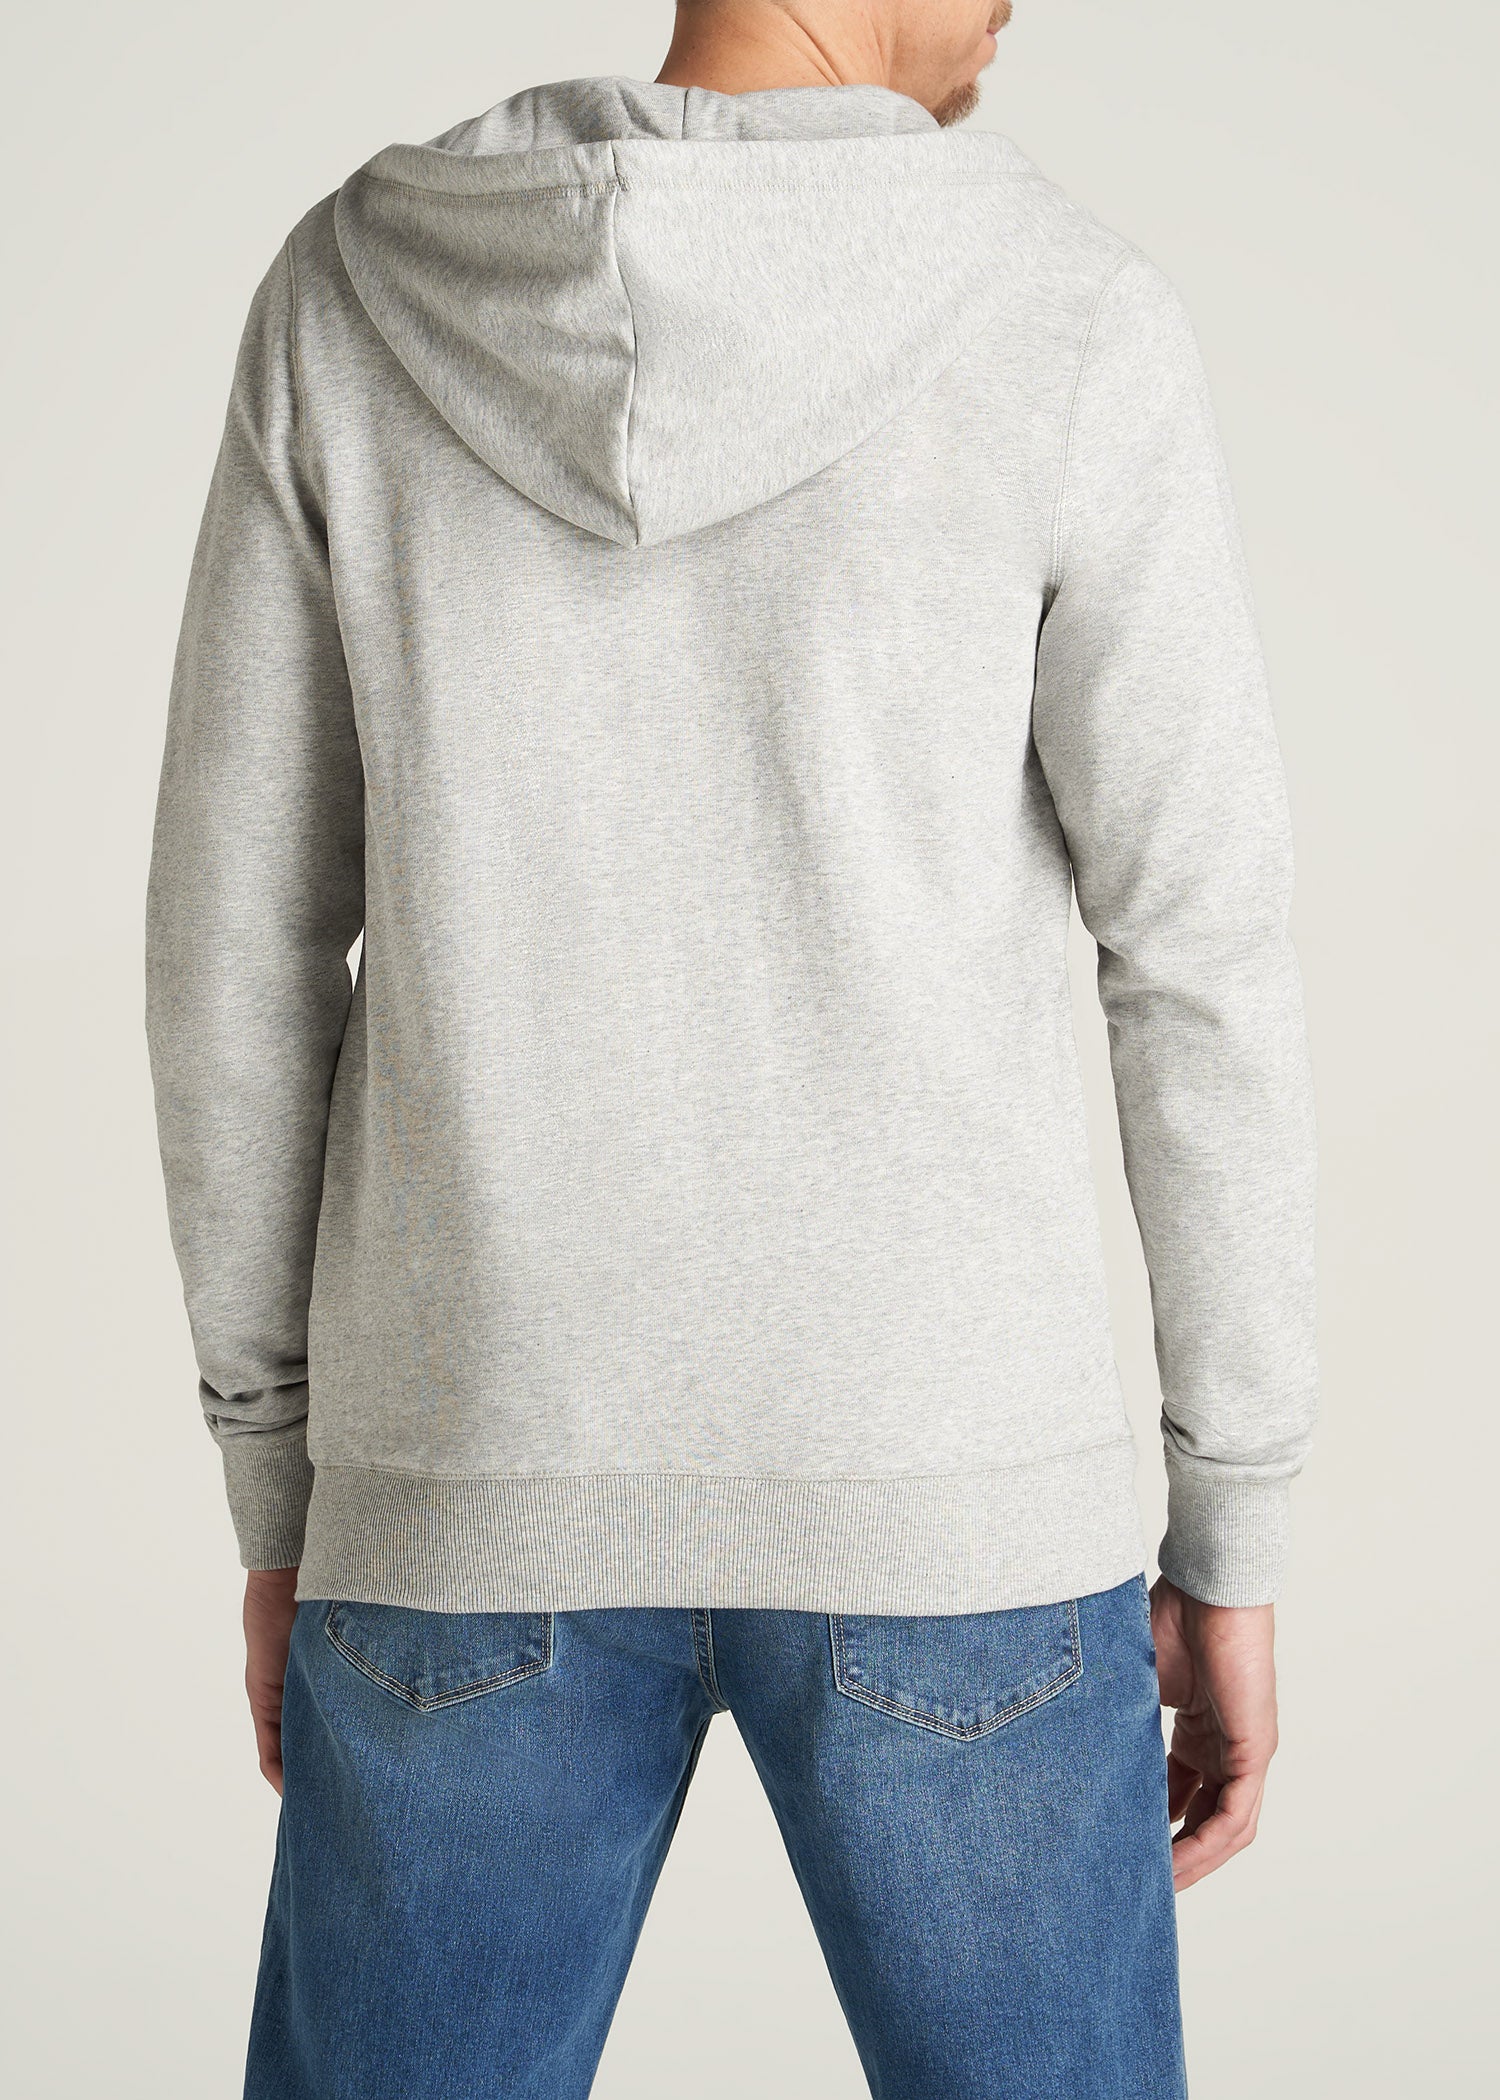 Men's Tall French Terry Zip Grey Hoodie | American Tall